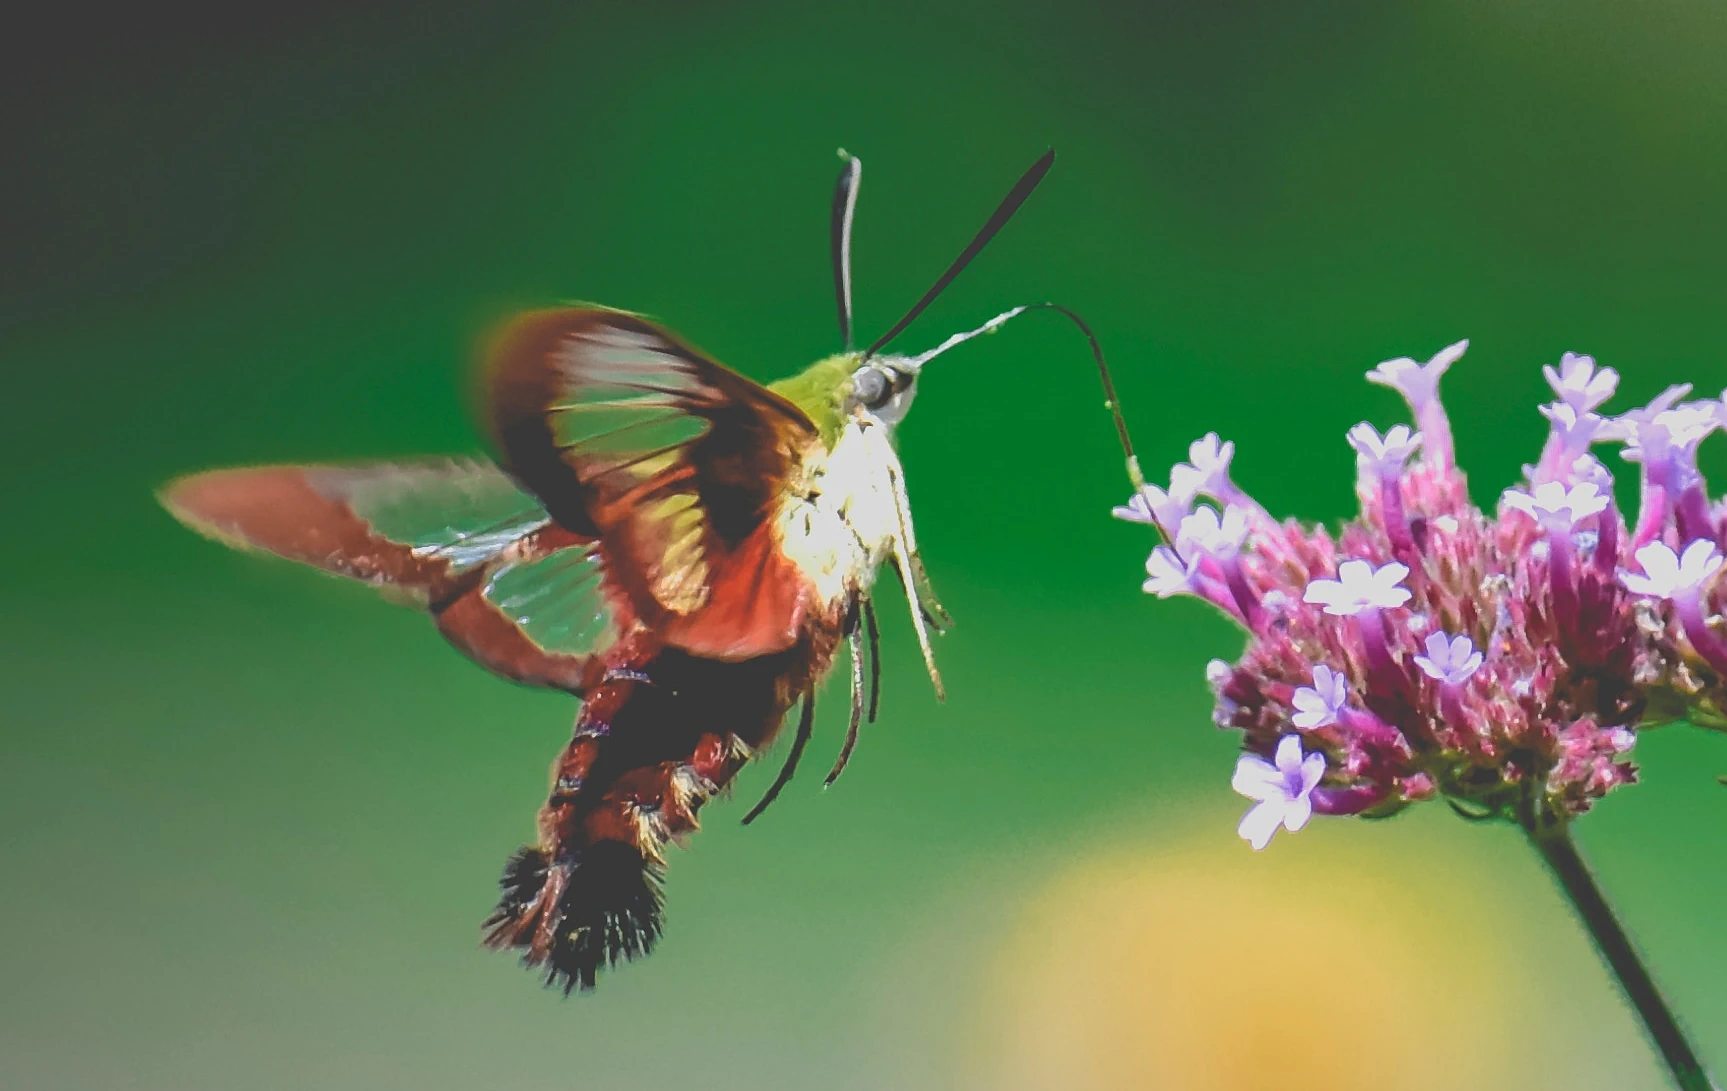 Hummingbird moth collecting pollen from violet flower